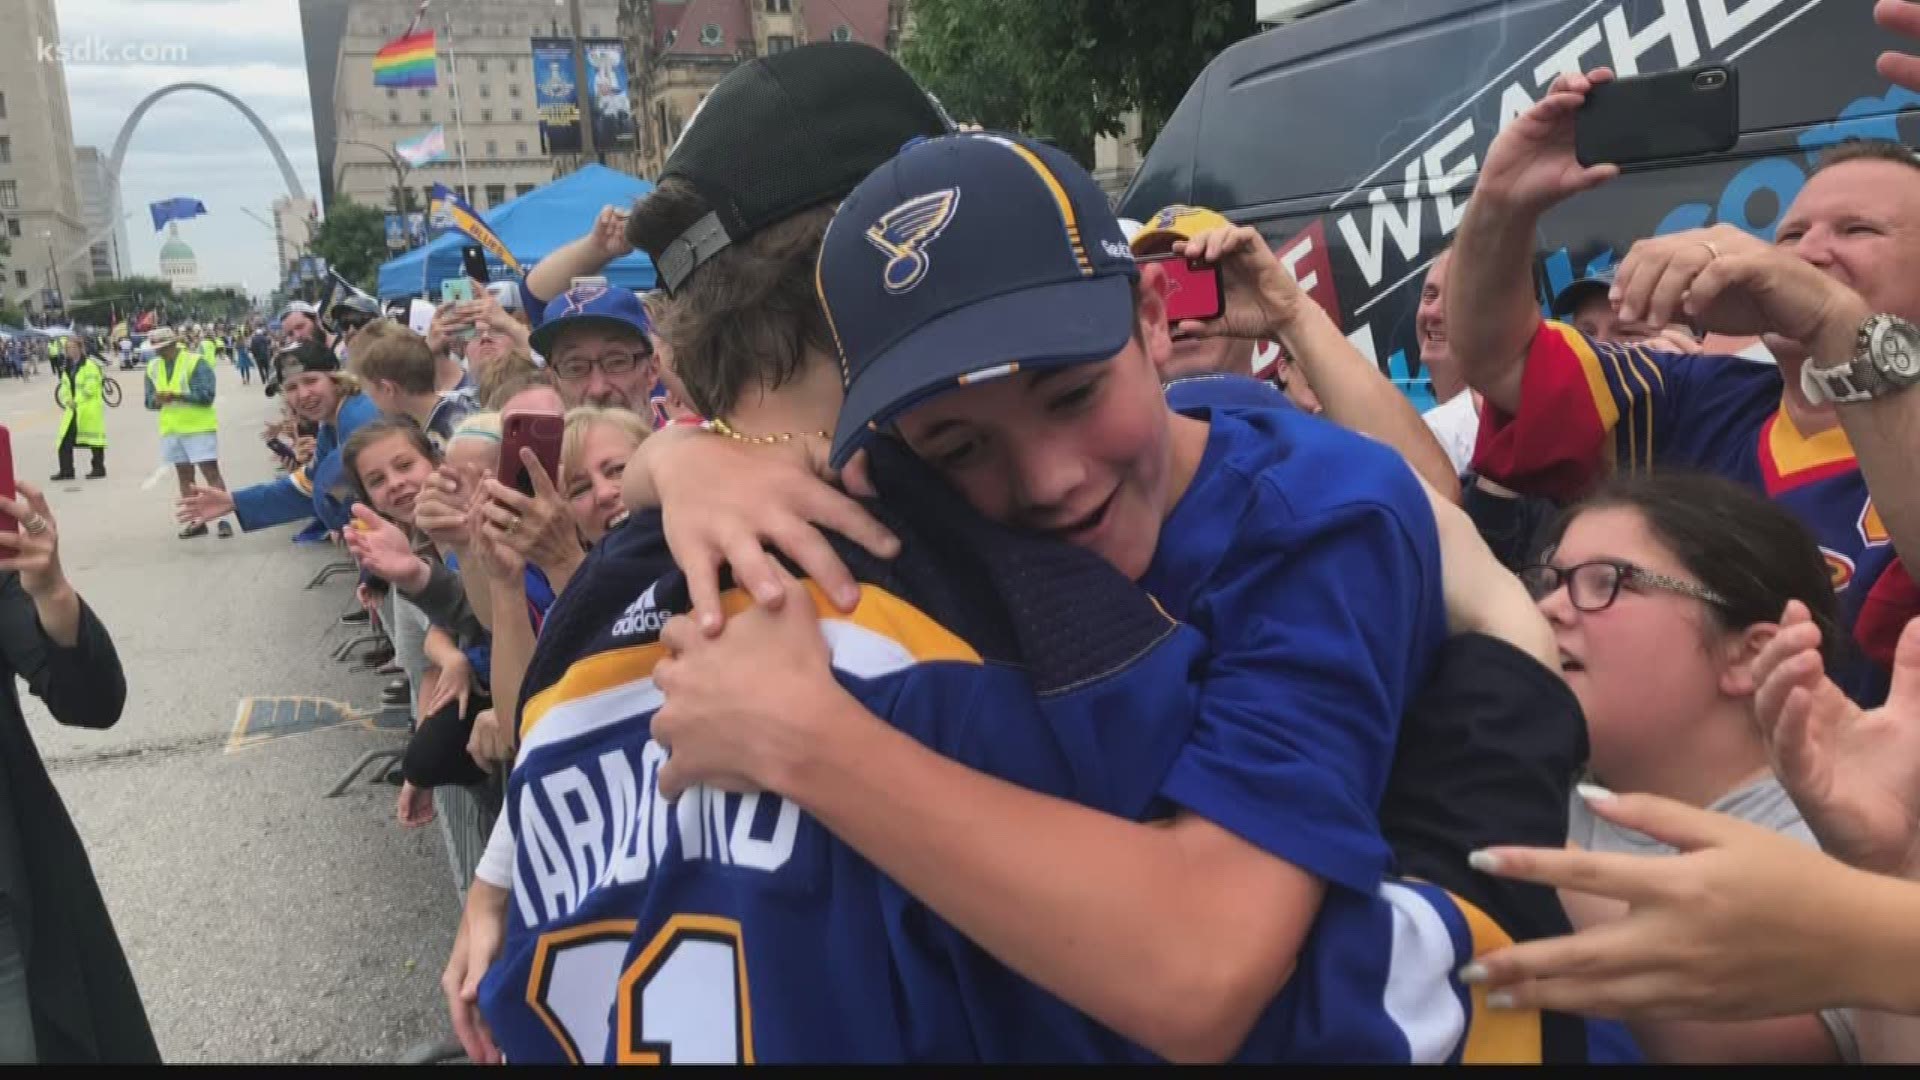 Relive The Run: Top moments from St. Louis Blues' first Stanley Cup